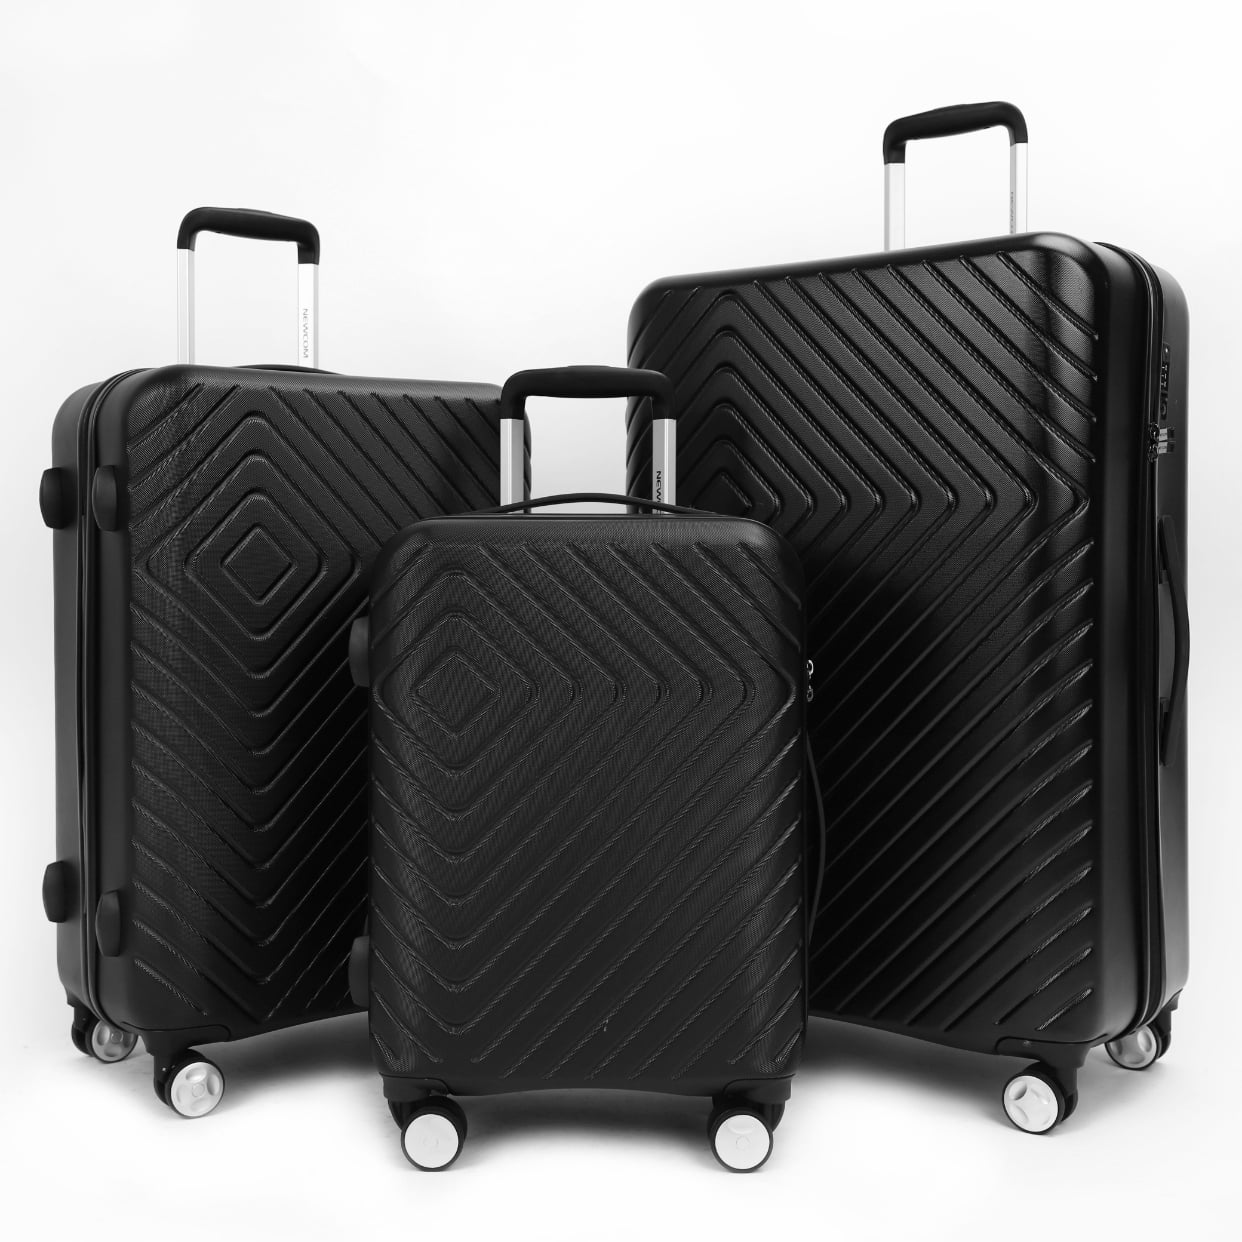 NEWCOM GROUP business suitcase new product listing | Suitcase, Company  profile, New product